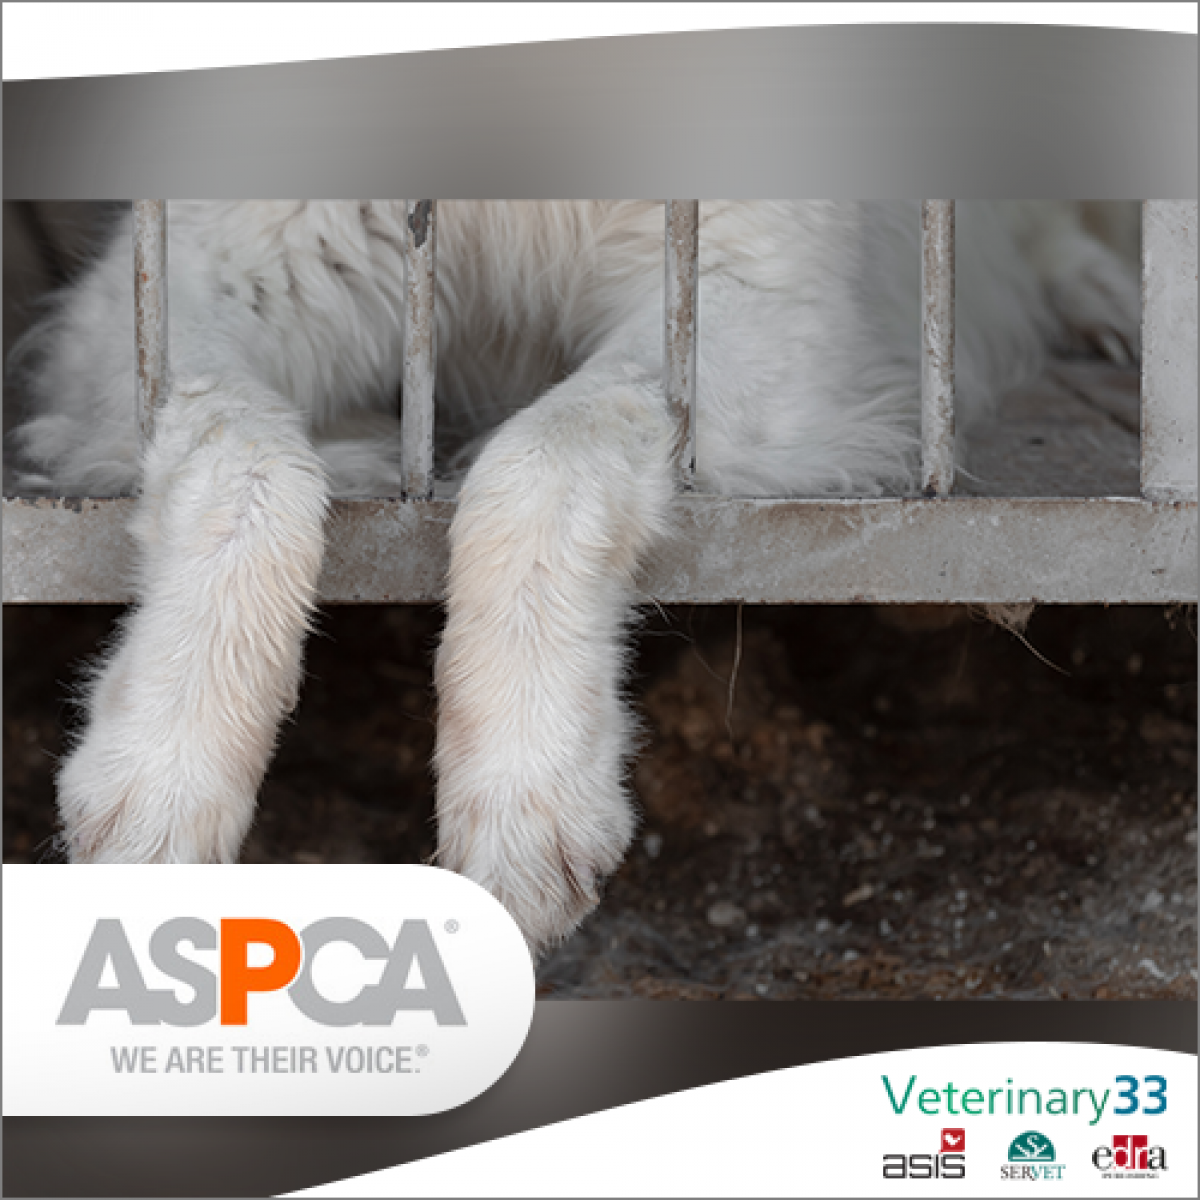 ASPCA praises 'Goldie's Act' which adds teeth to puppy mill management |  Veterinary 33